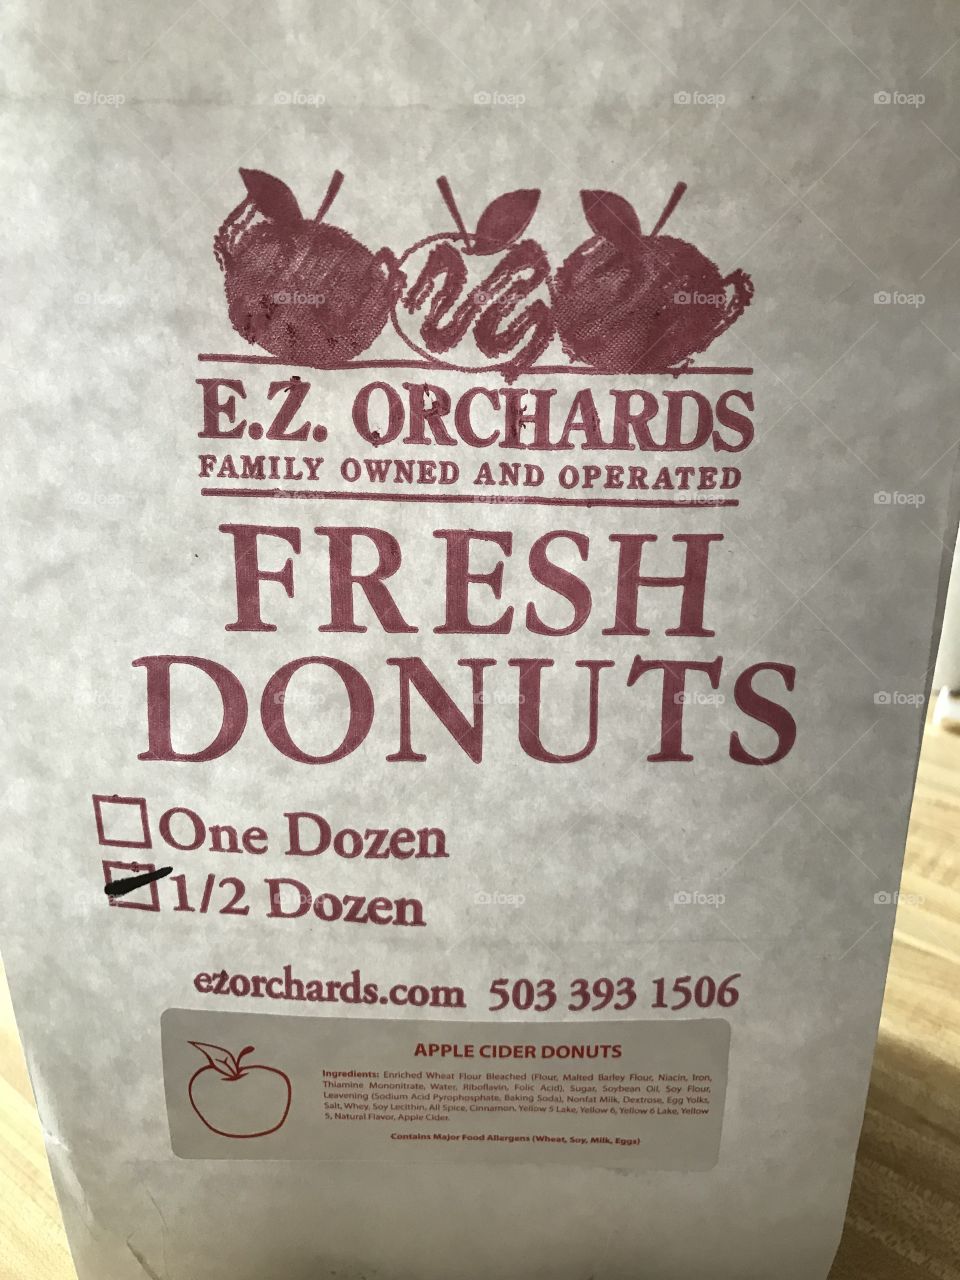 A white paper bag filled with a half dozen freshly made donuts from a farm market 